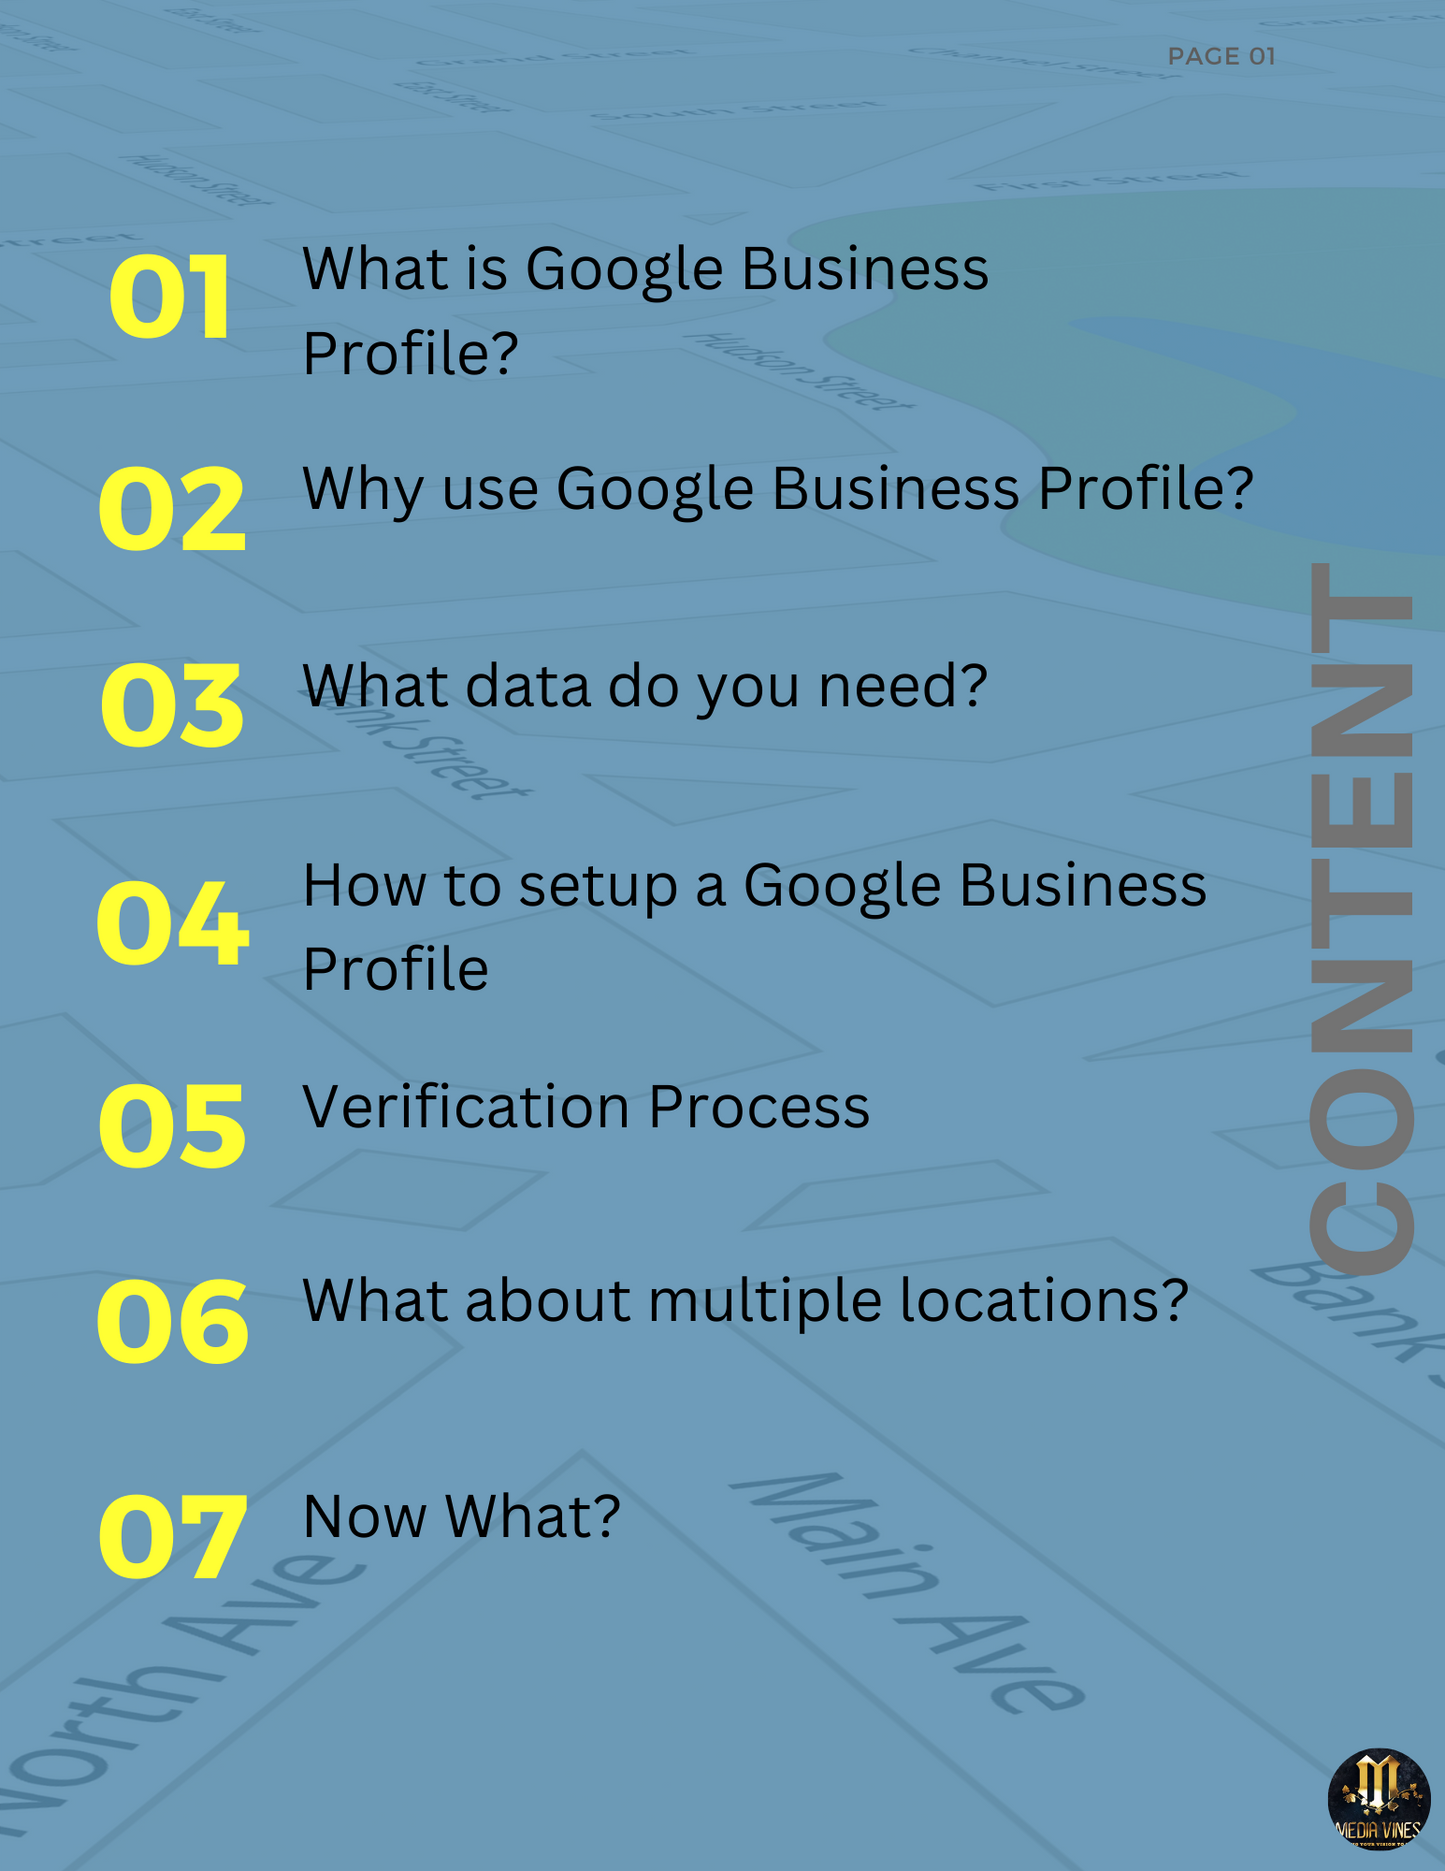 TOC - Guide to Google Business Profile (GBP) - a DIY ebook for small business to get listed on GBP by Media Vines Corp of Kihei, HI